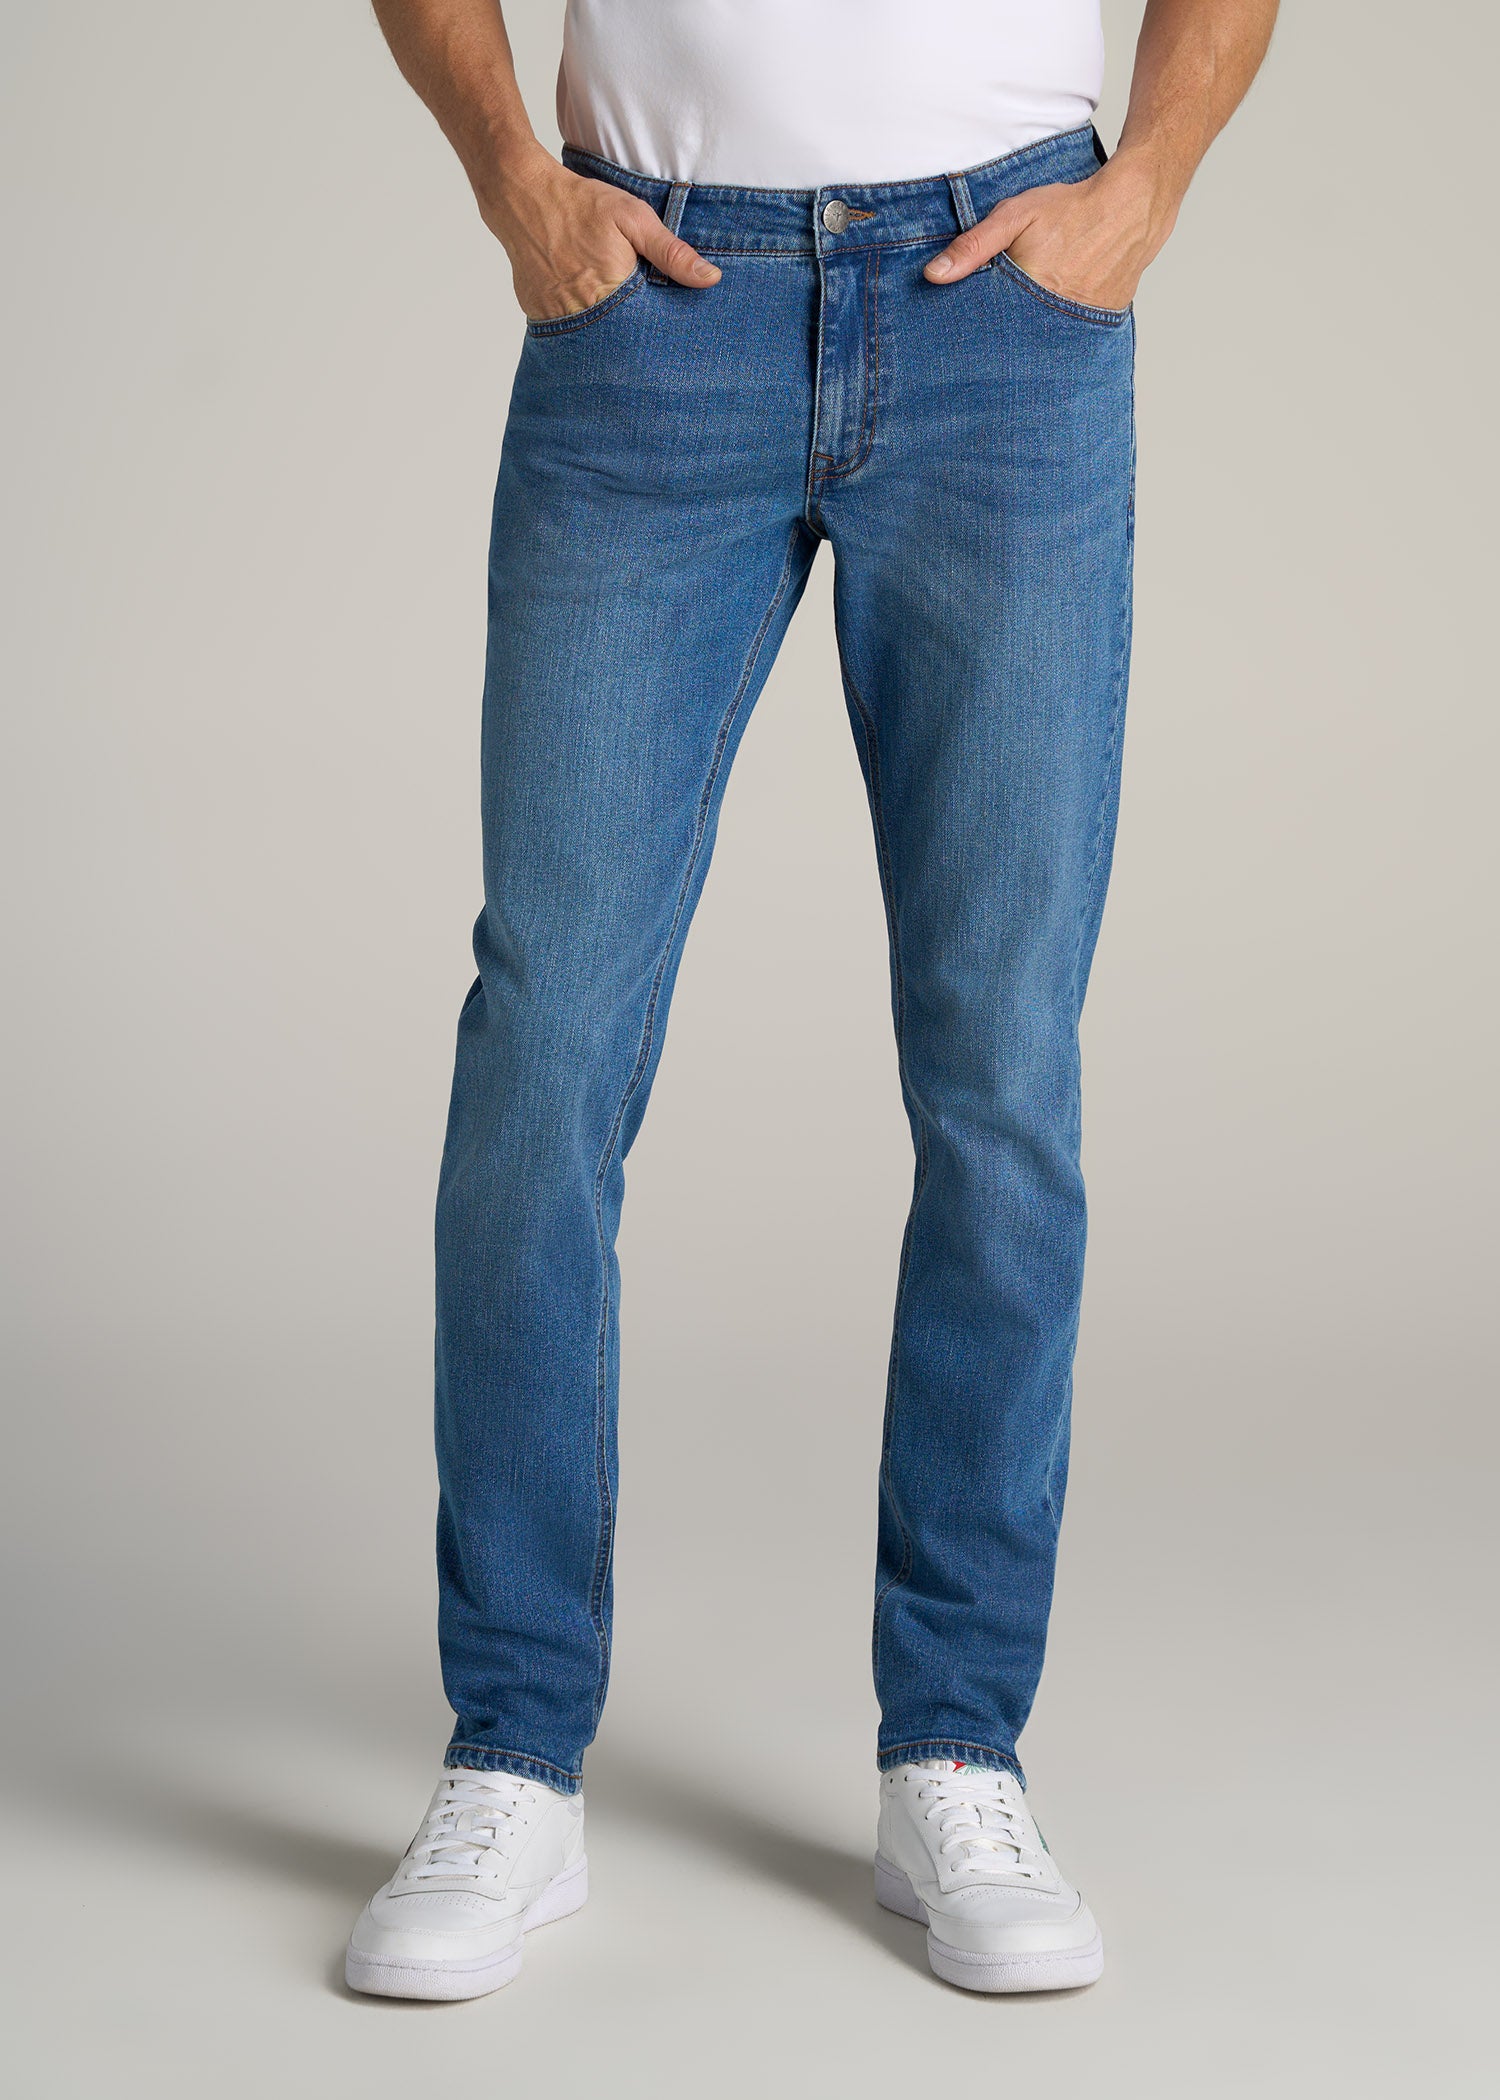 kijk in ironie Boos worden Carman Tapered Jeans for Tall Men | American Tall